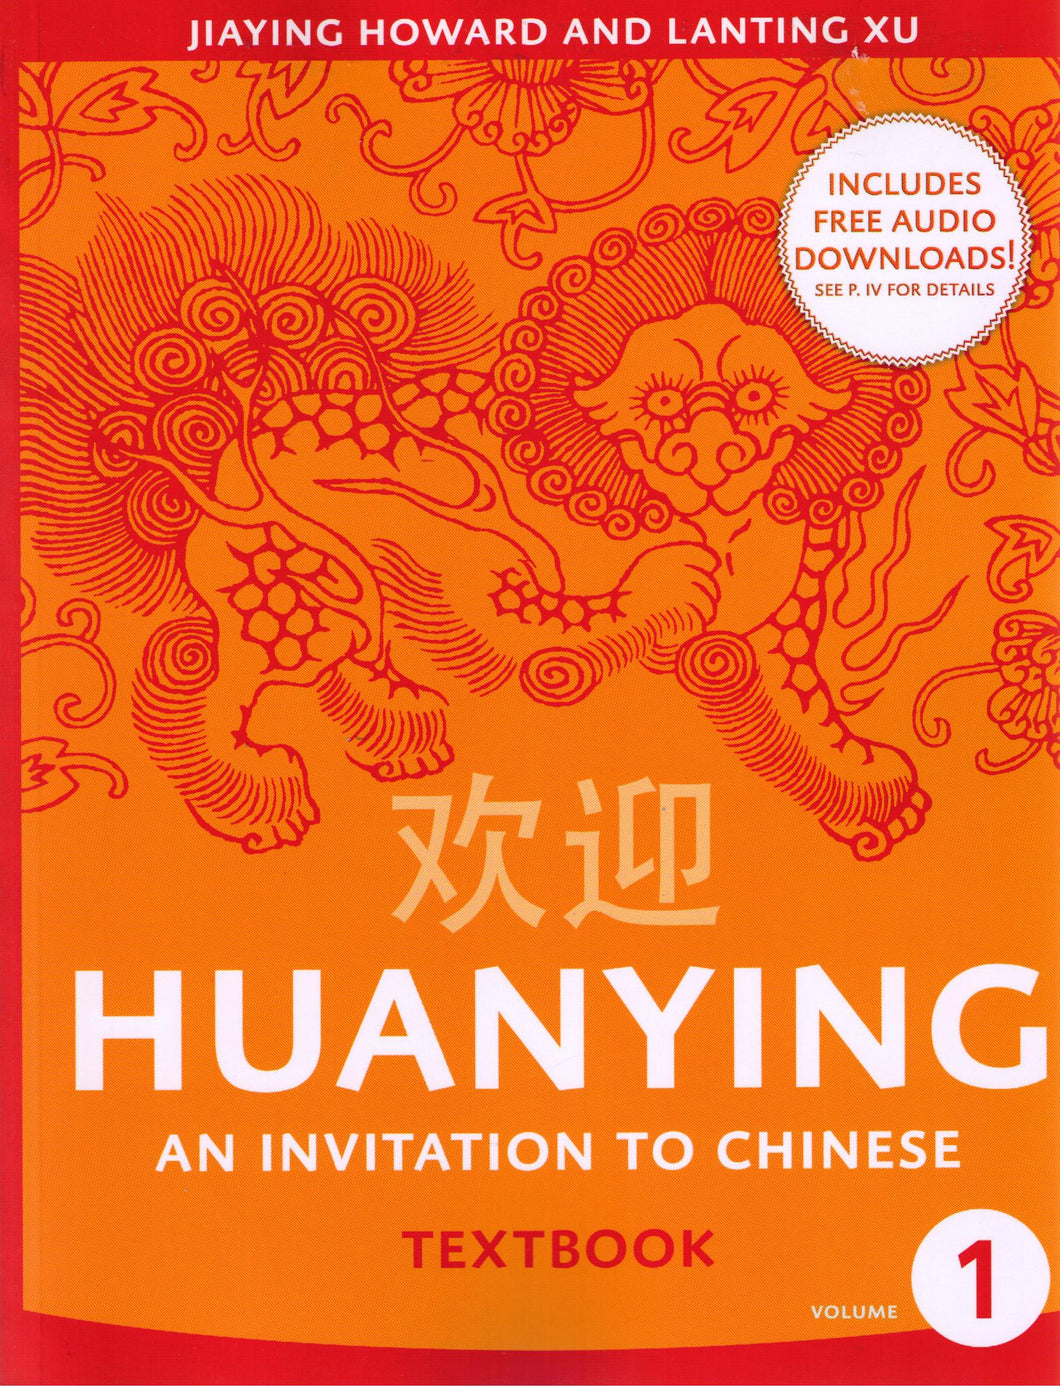 Huanying 歡迎 Volume 1- Textbook-Simplified-Hardcover